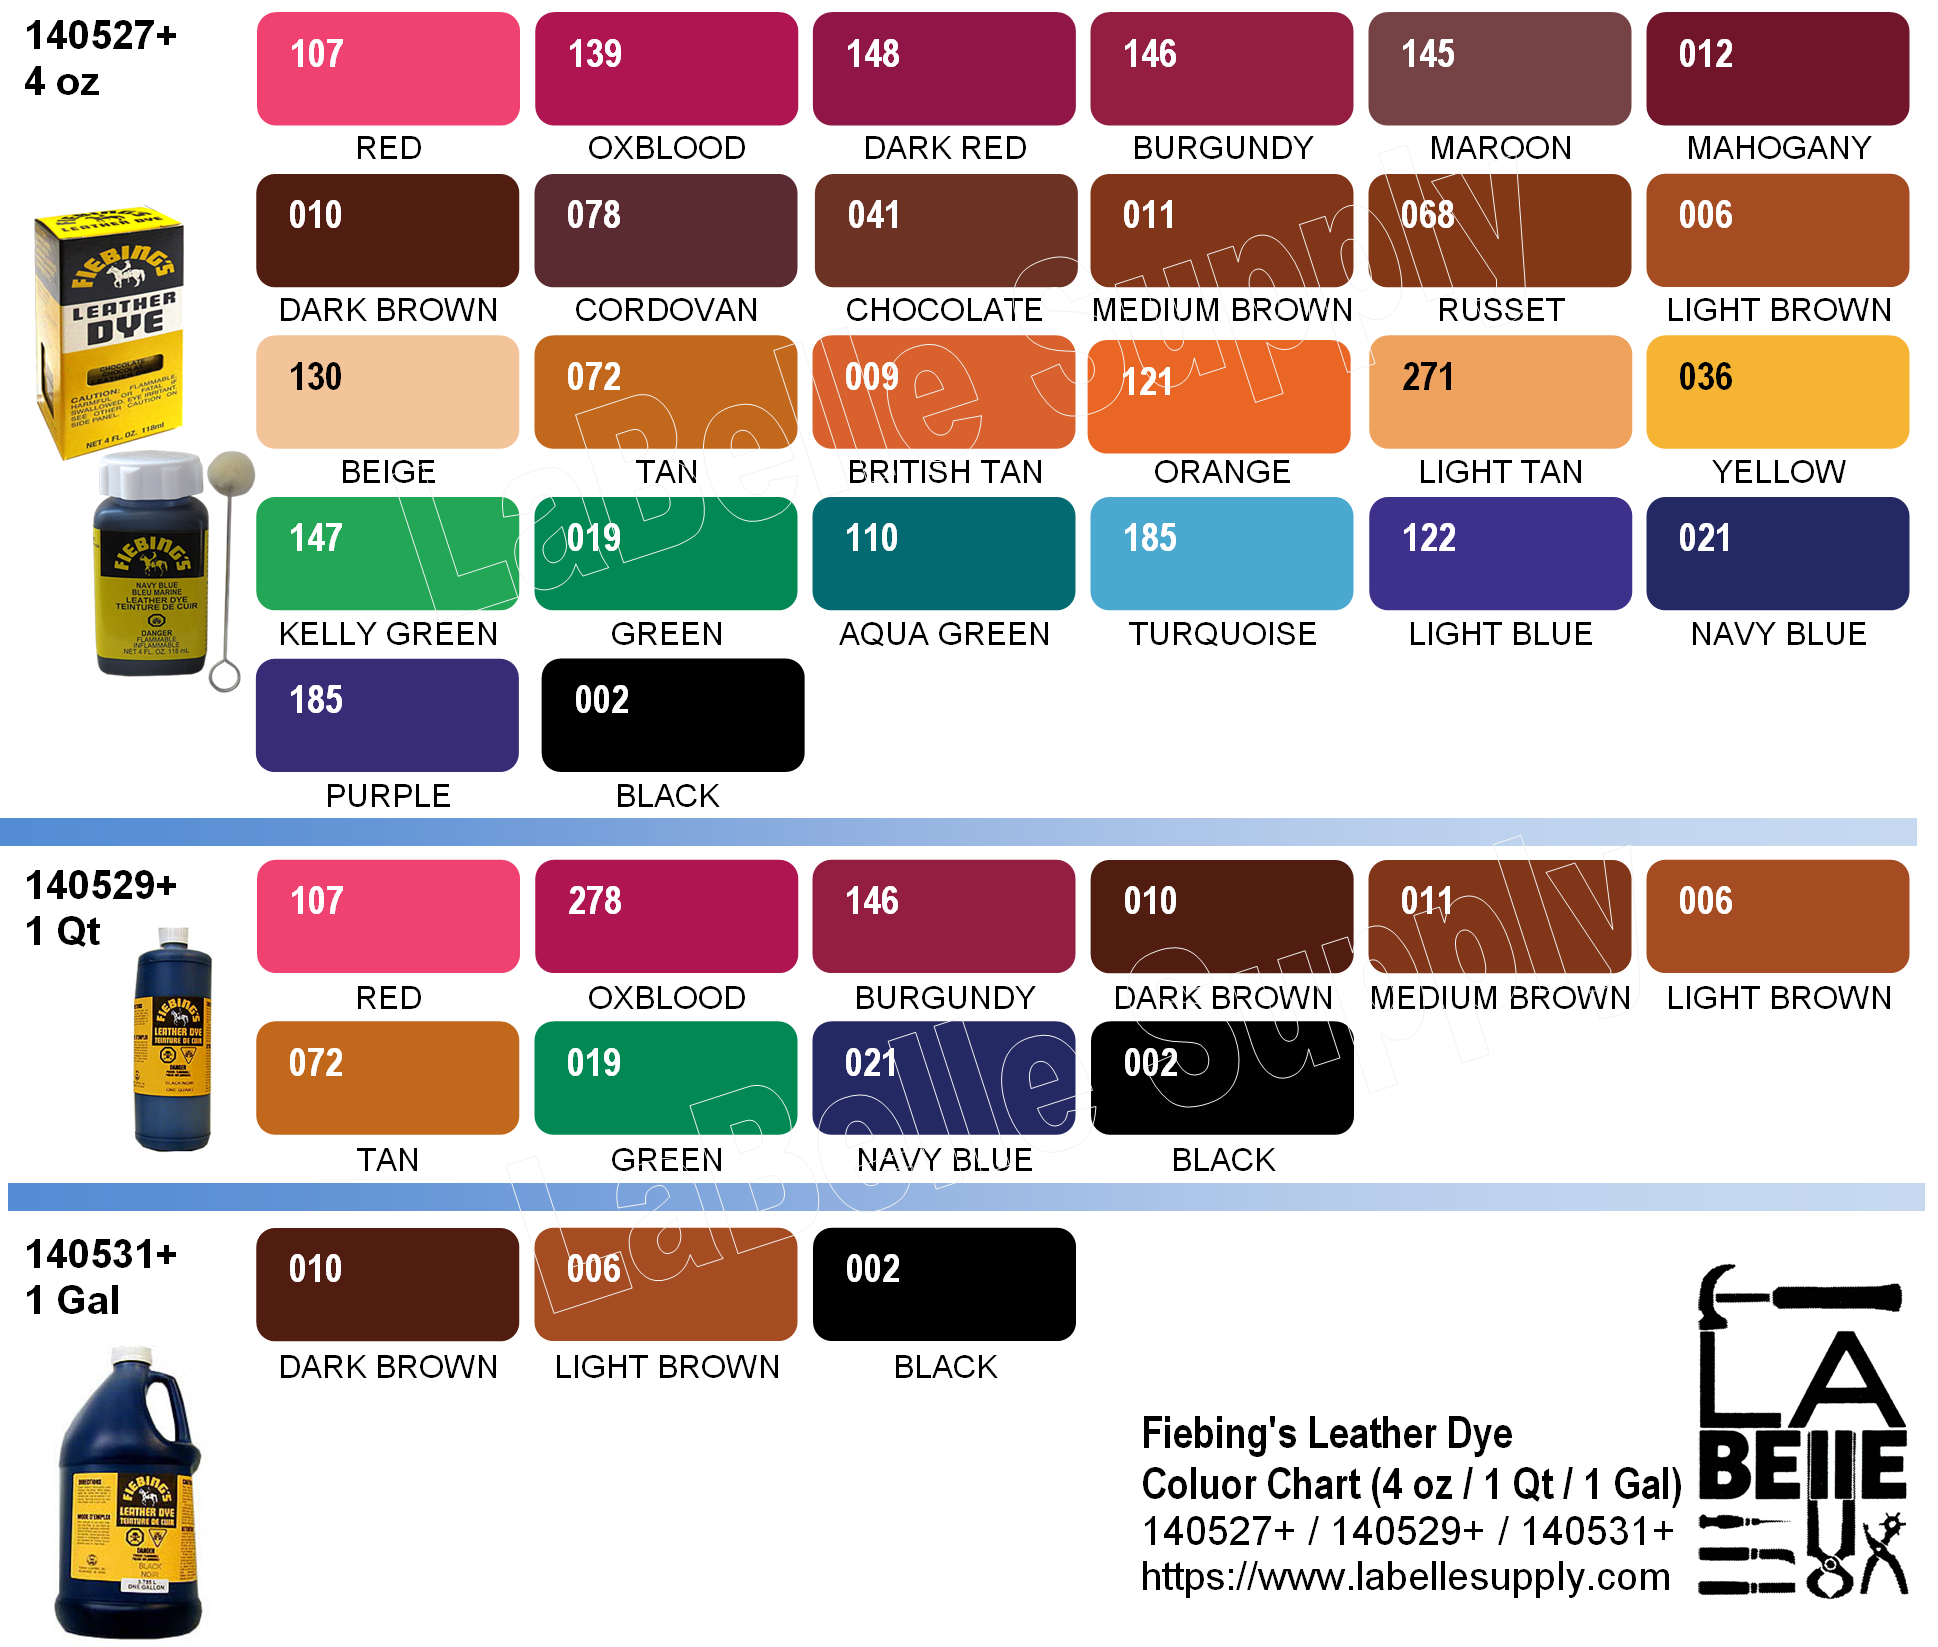 Fiebing's Leather Dye Colour Chart - LaBelle Supply